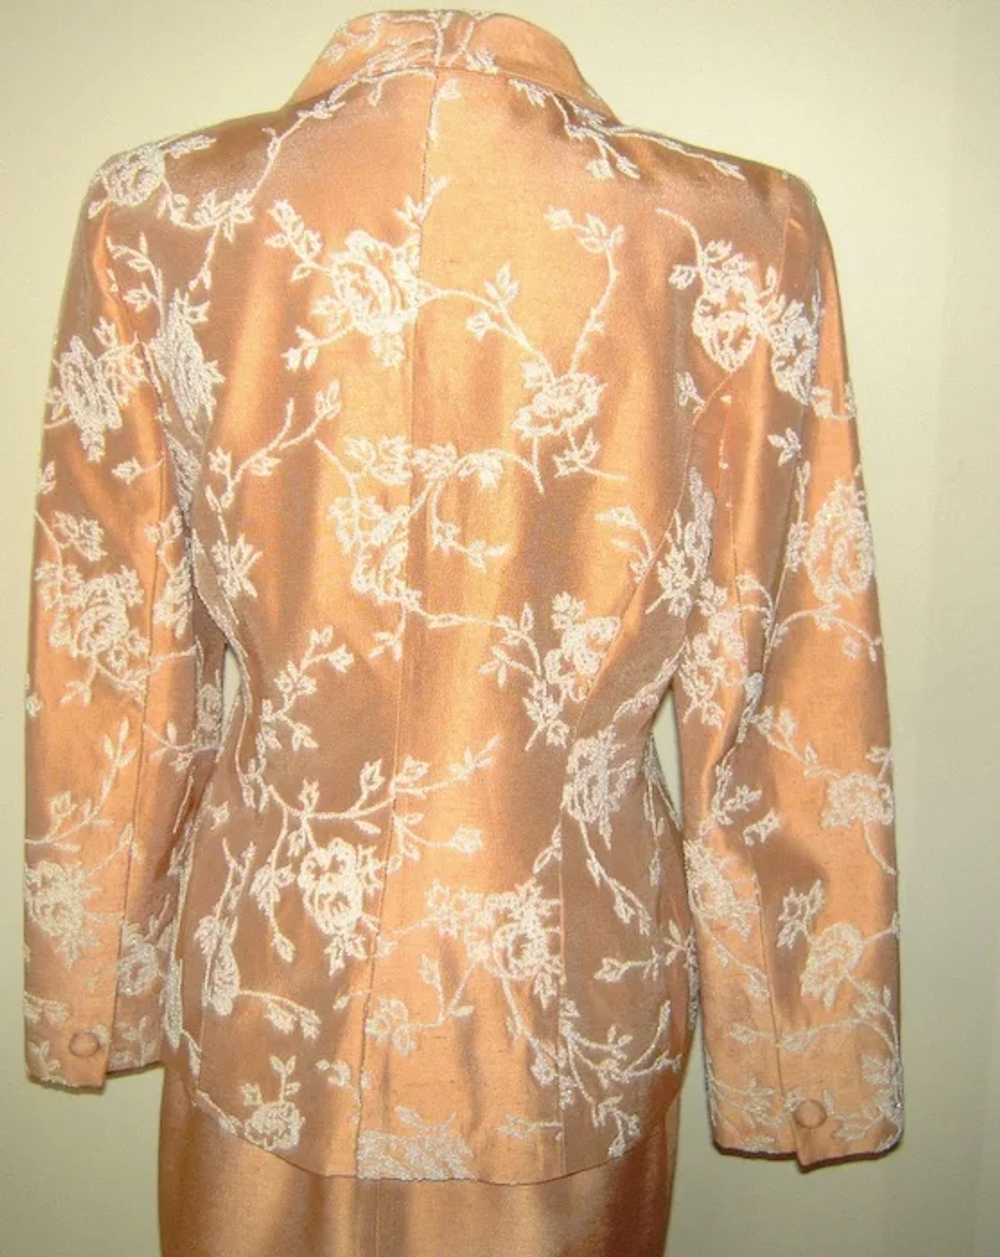 Vintage Peach Tan Suit with White Beading - image 2